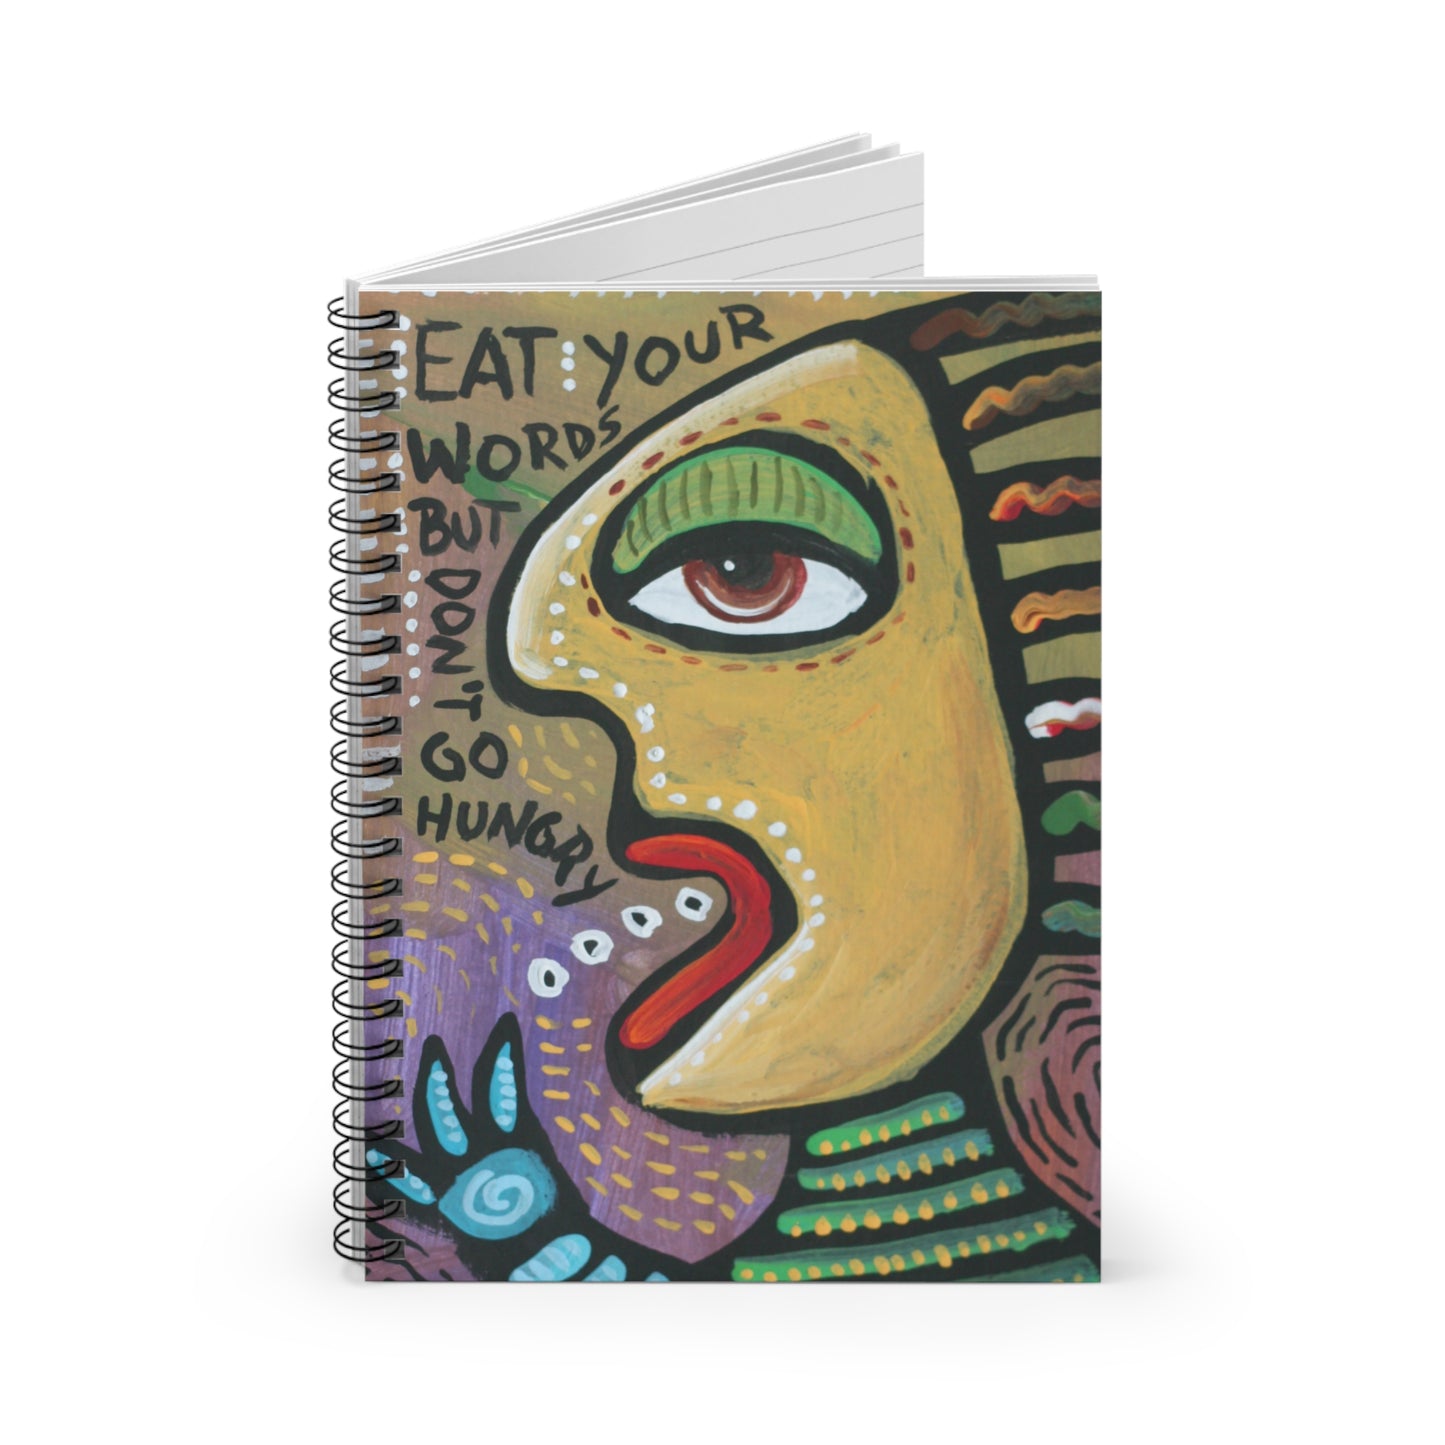 Eat Your Words Spiral Notebook - Ruled Line